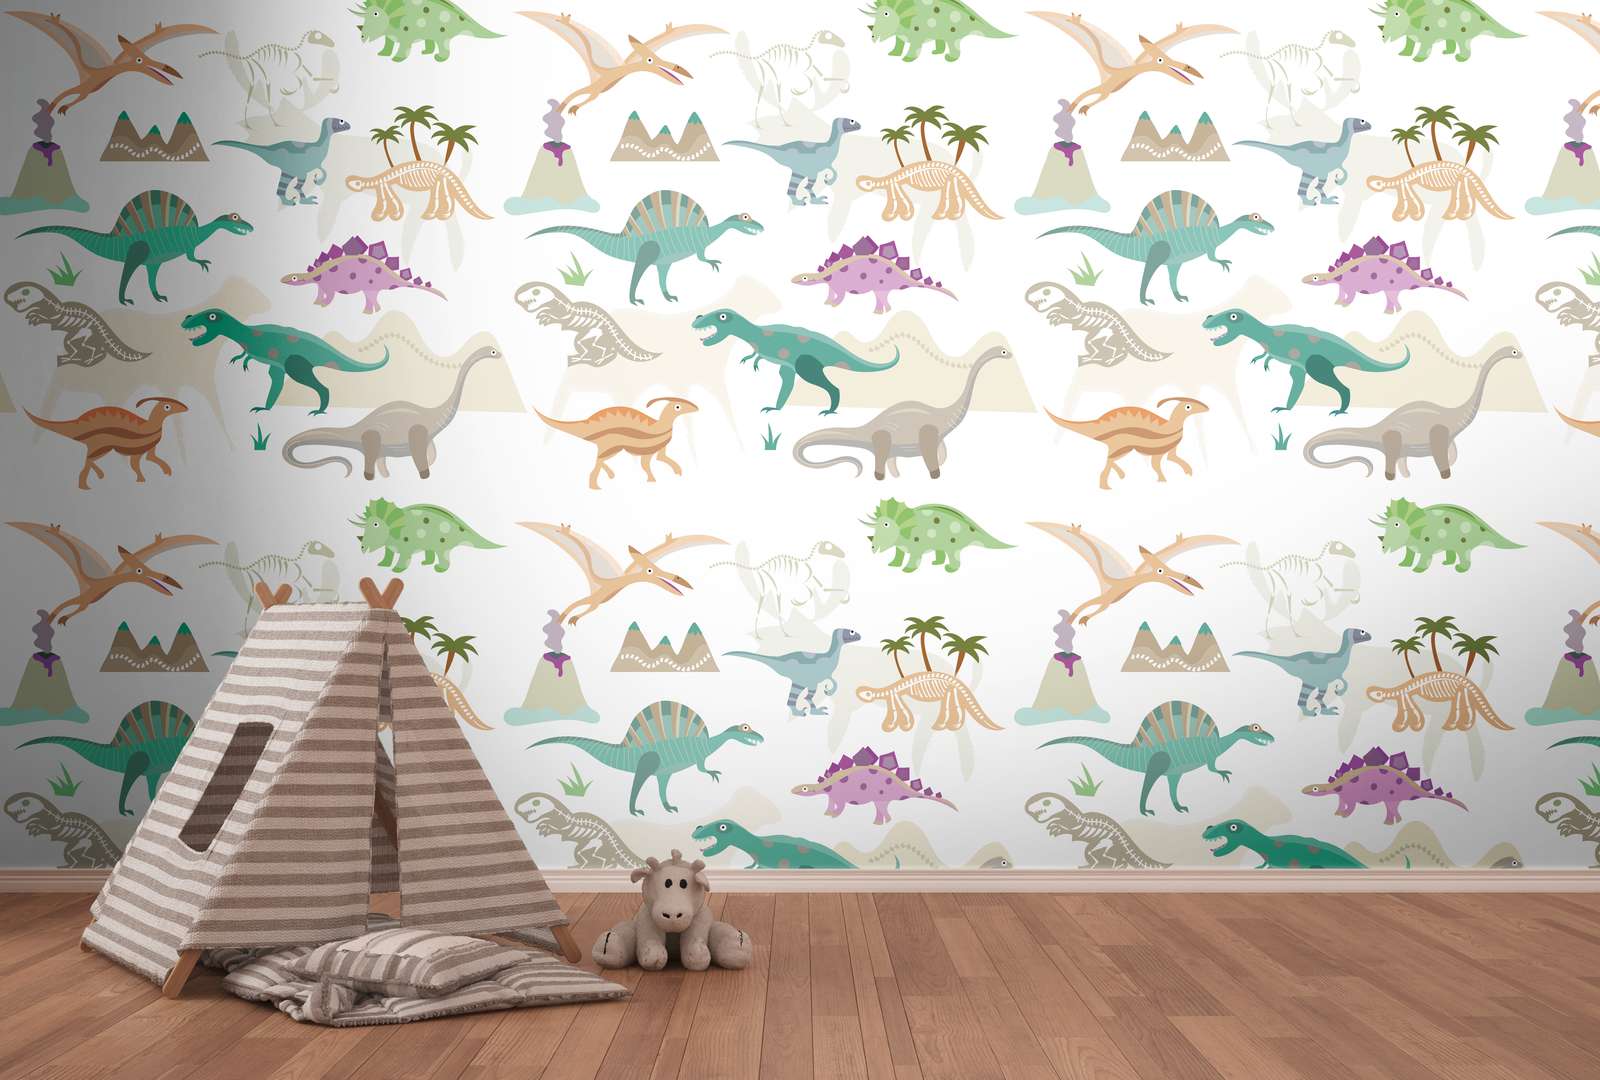             Children's motif wallpaper with dinosaurs and volcanoes - colourful, cream, beige
        